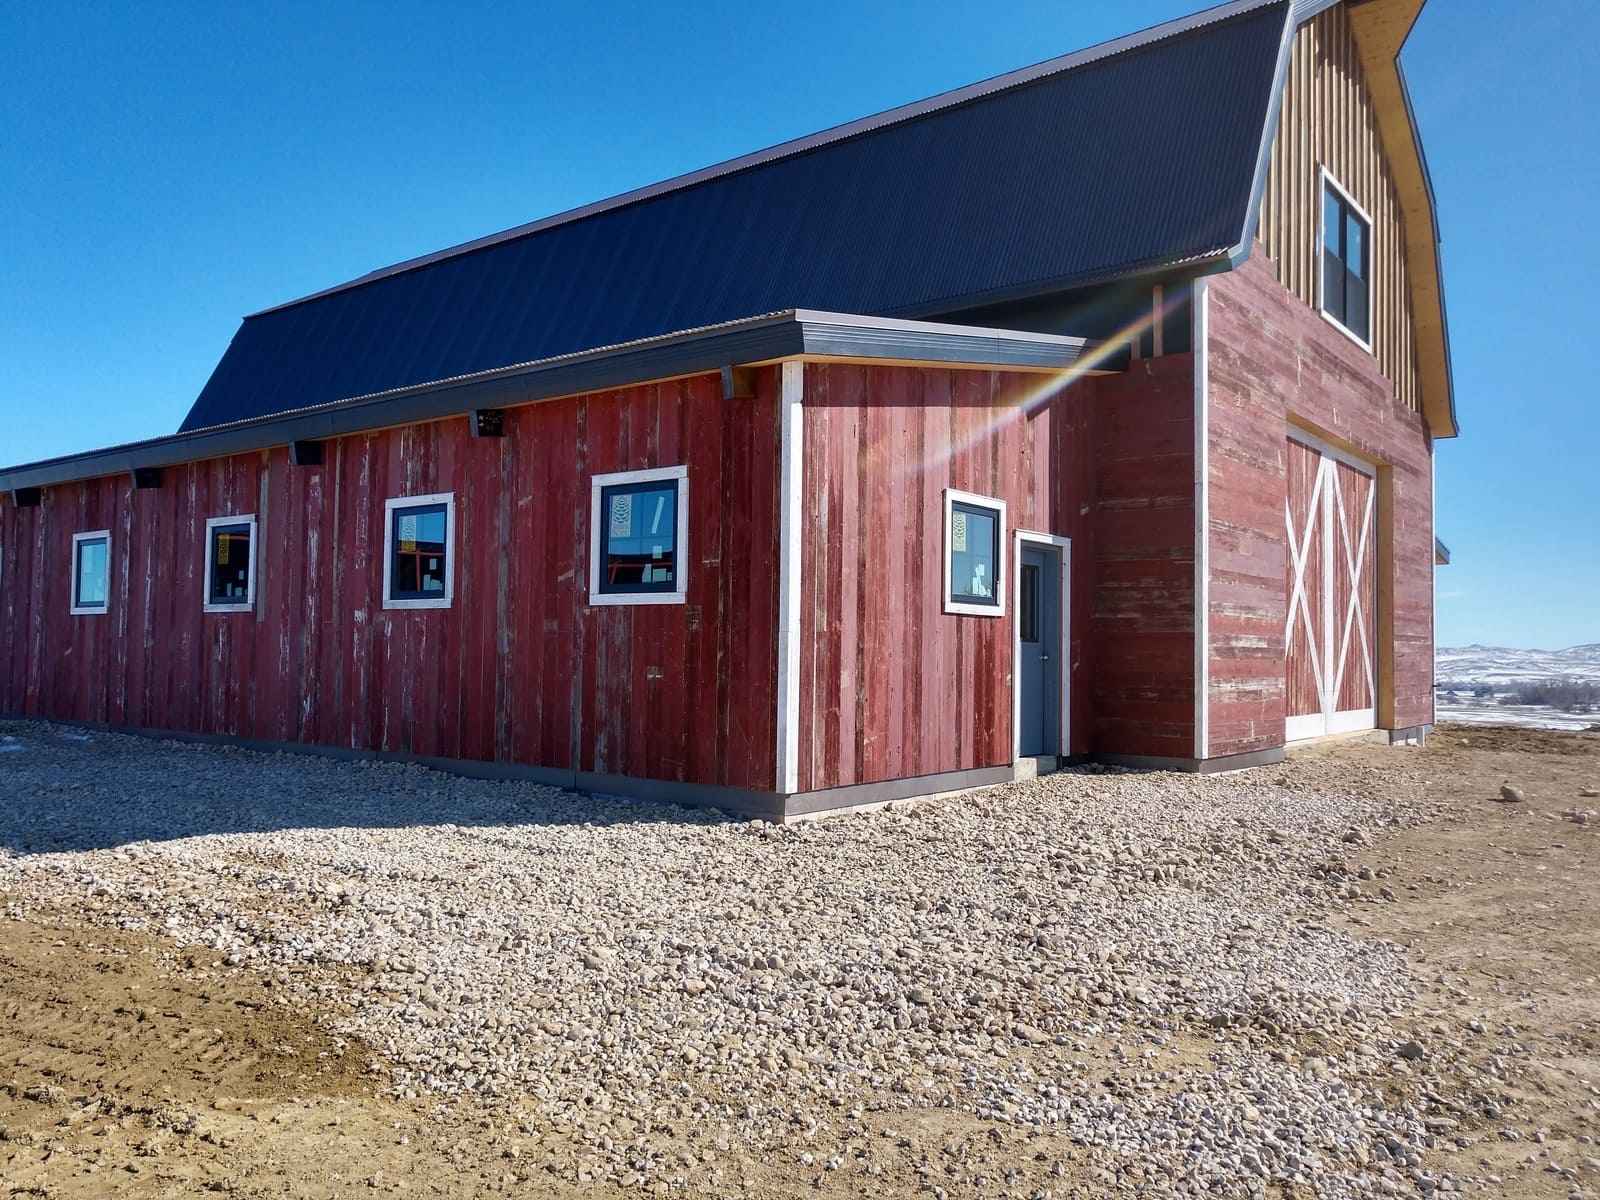 Custom barn side exterior with new windows and reclaimed wood